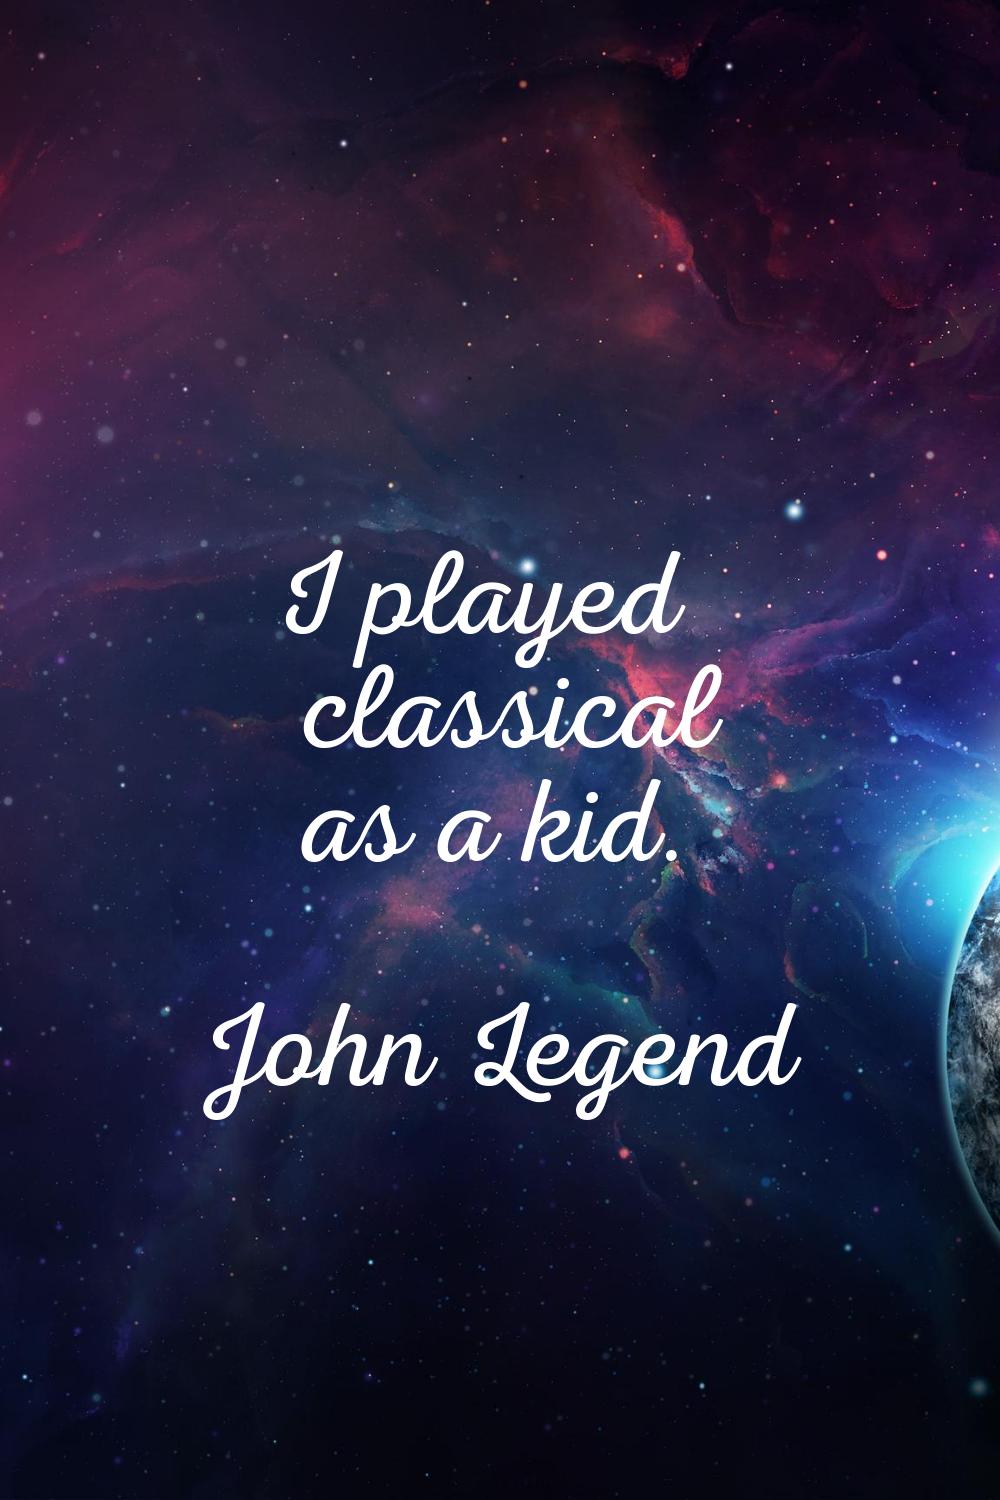 I played classical as a kid.